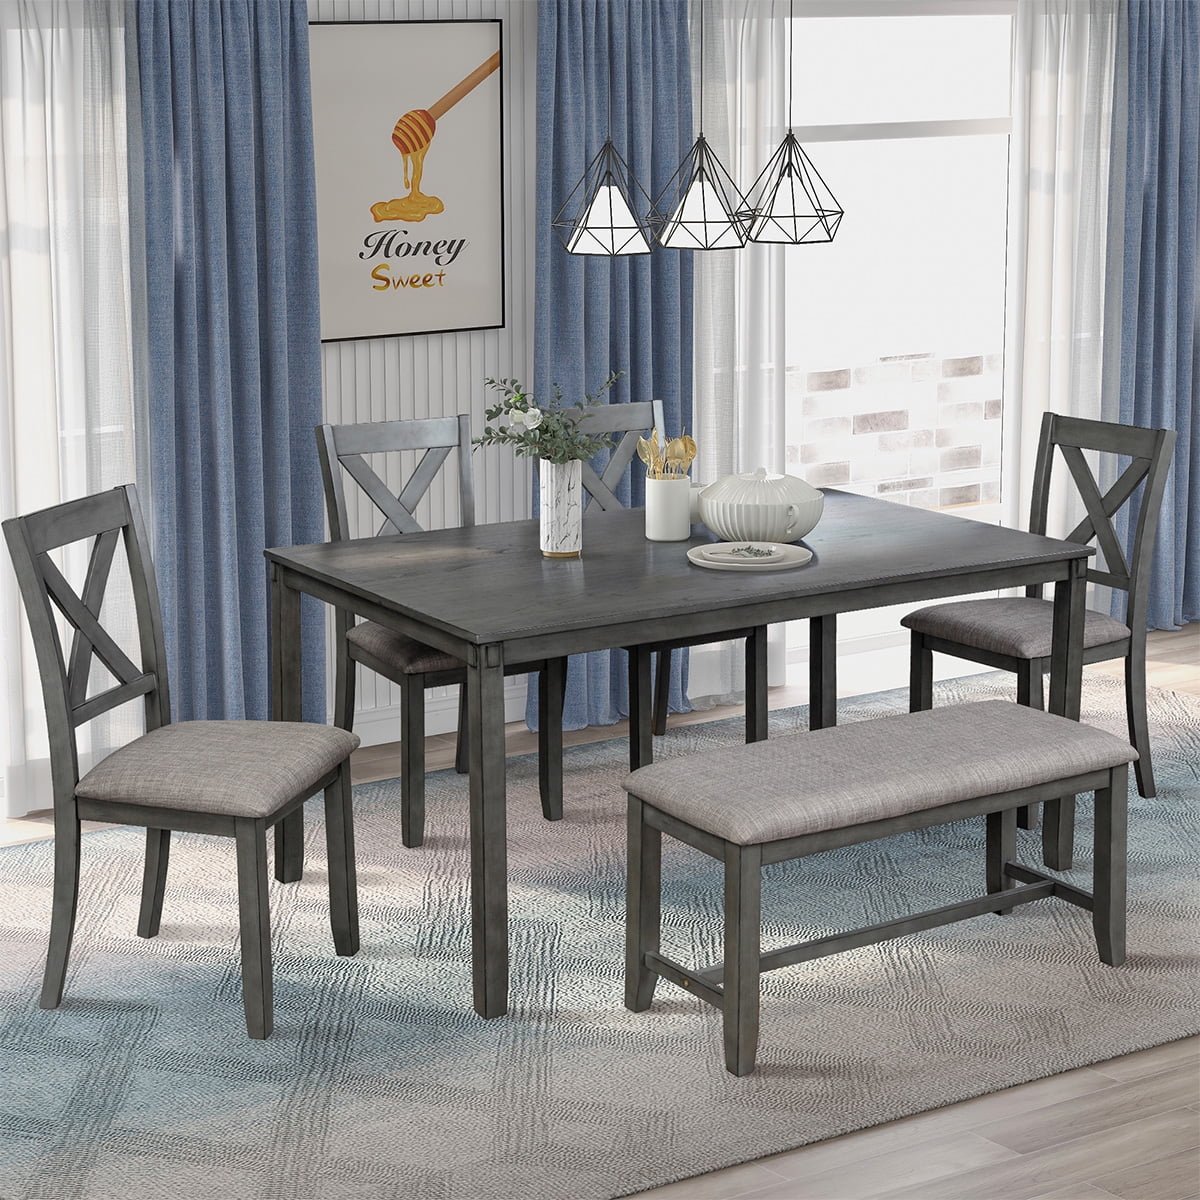 SENTERN 6-Piece Dining Table Set with Rectangular Table, Bench, 4